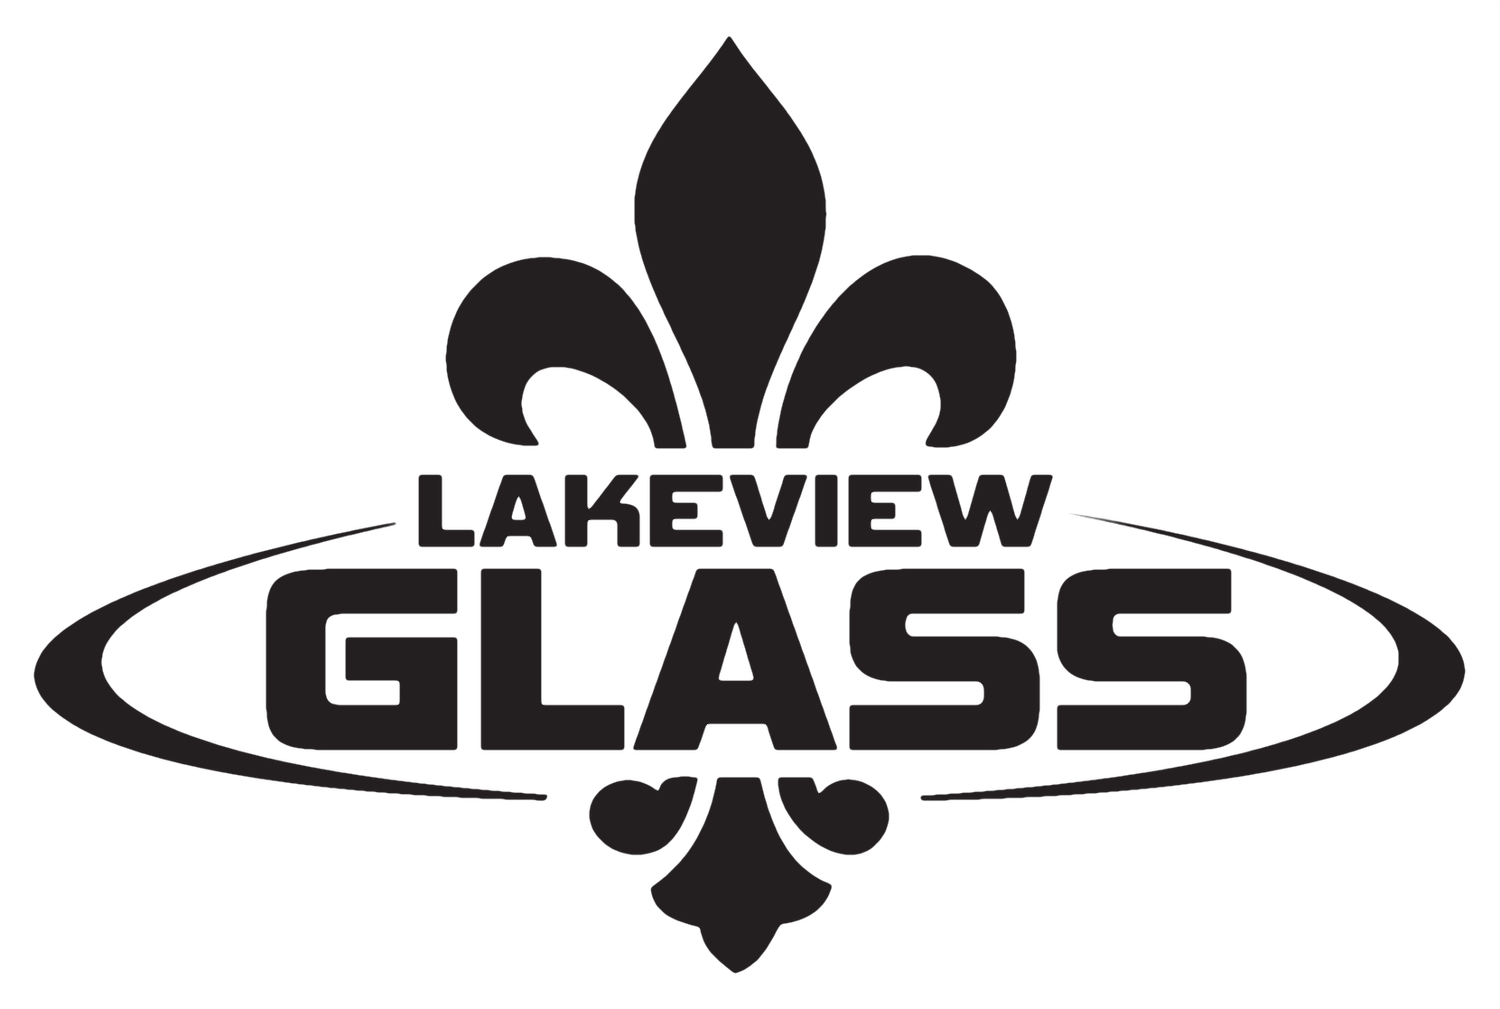 LAKEVIEW GLASS